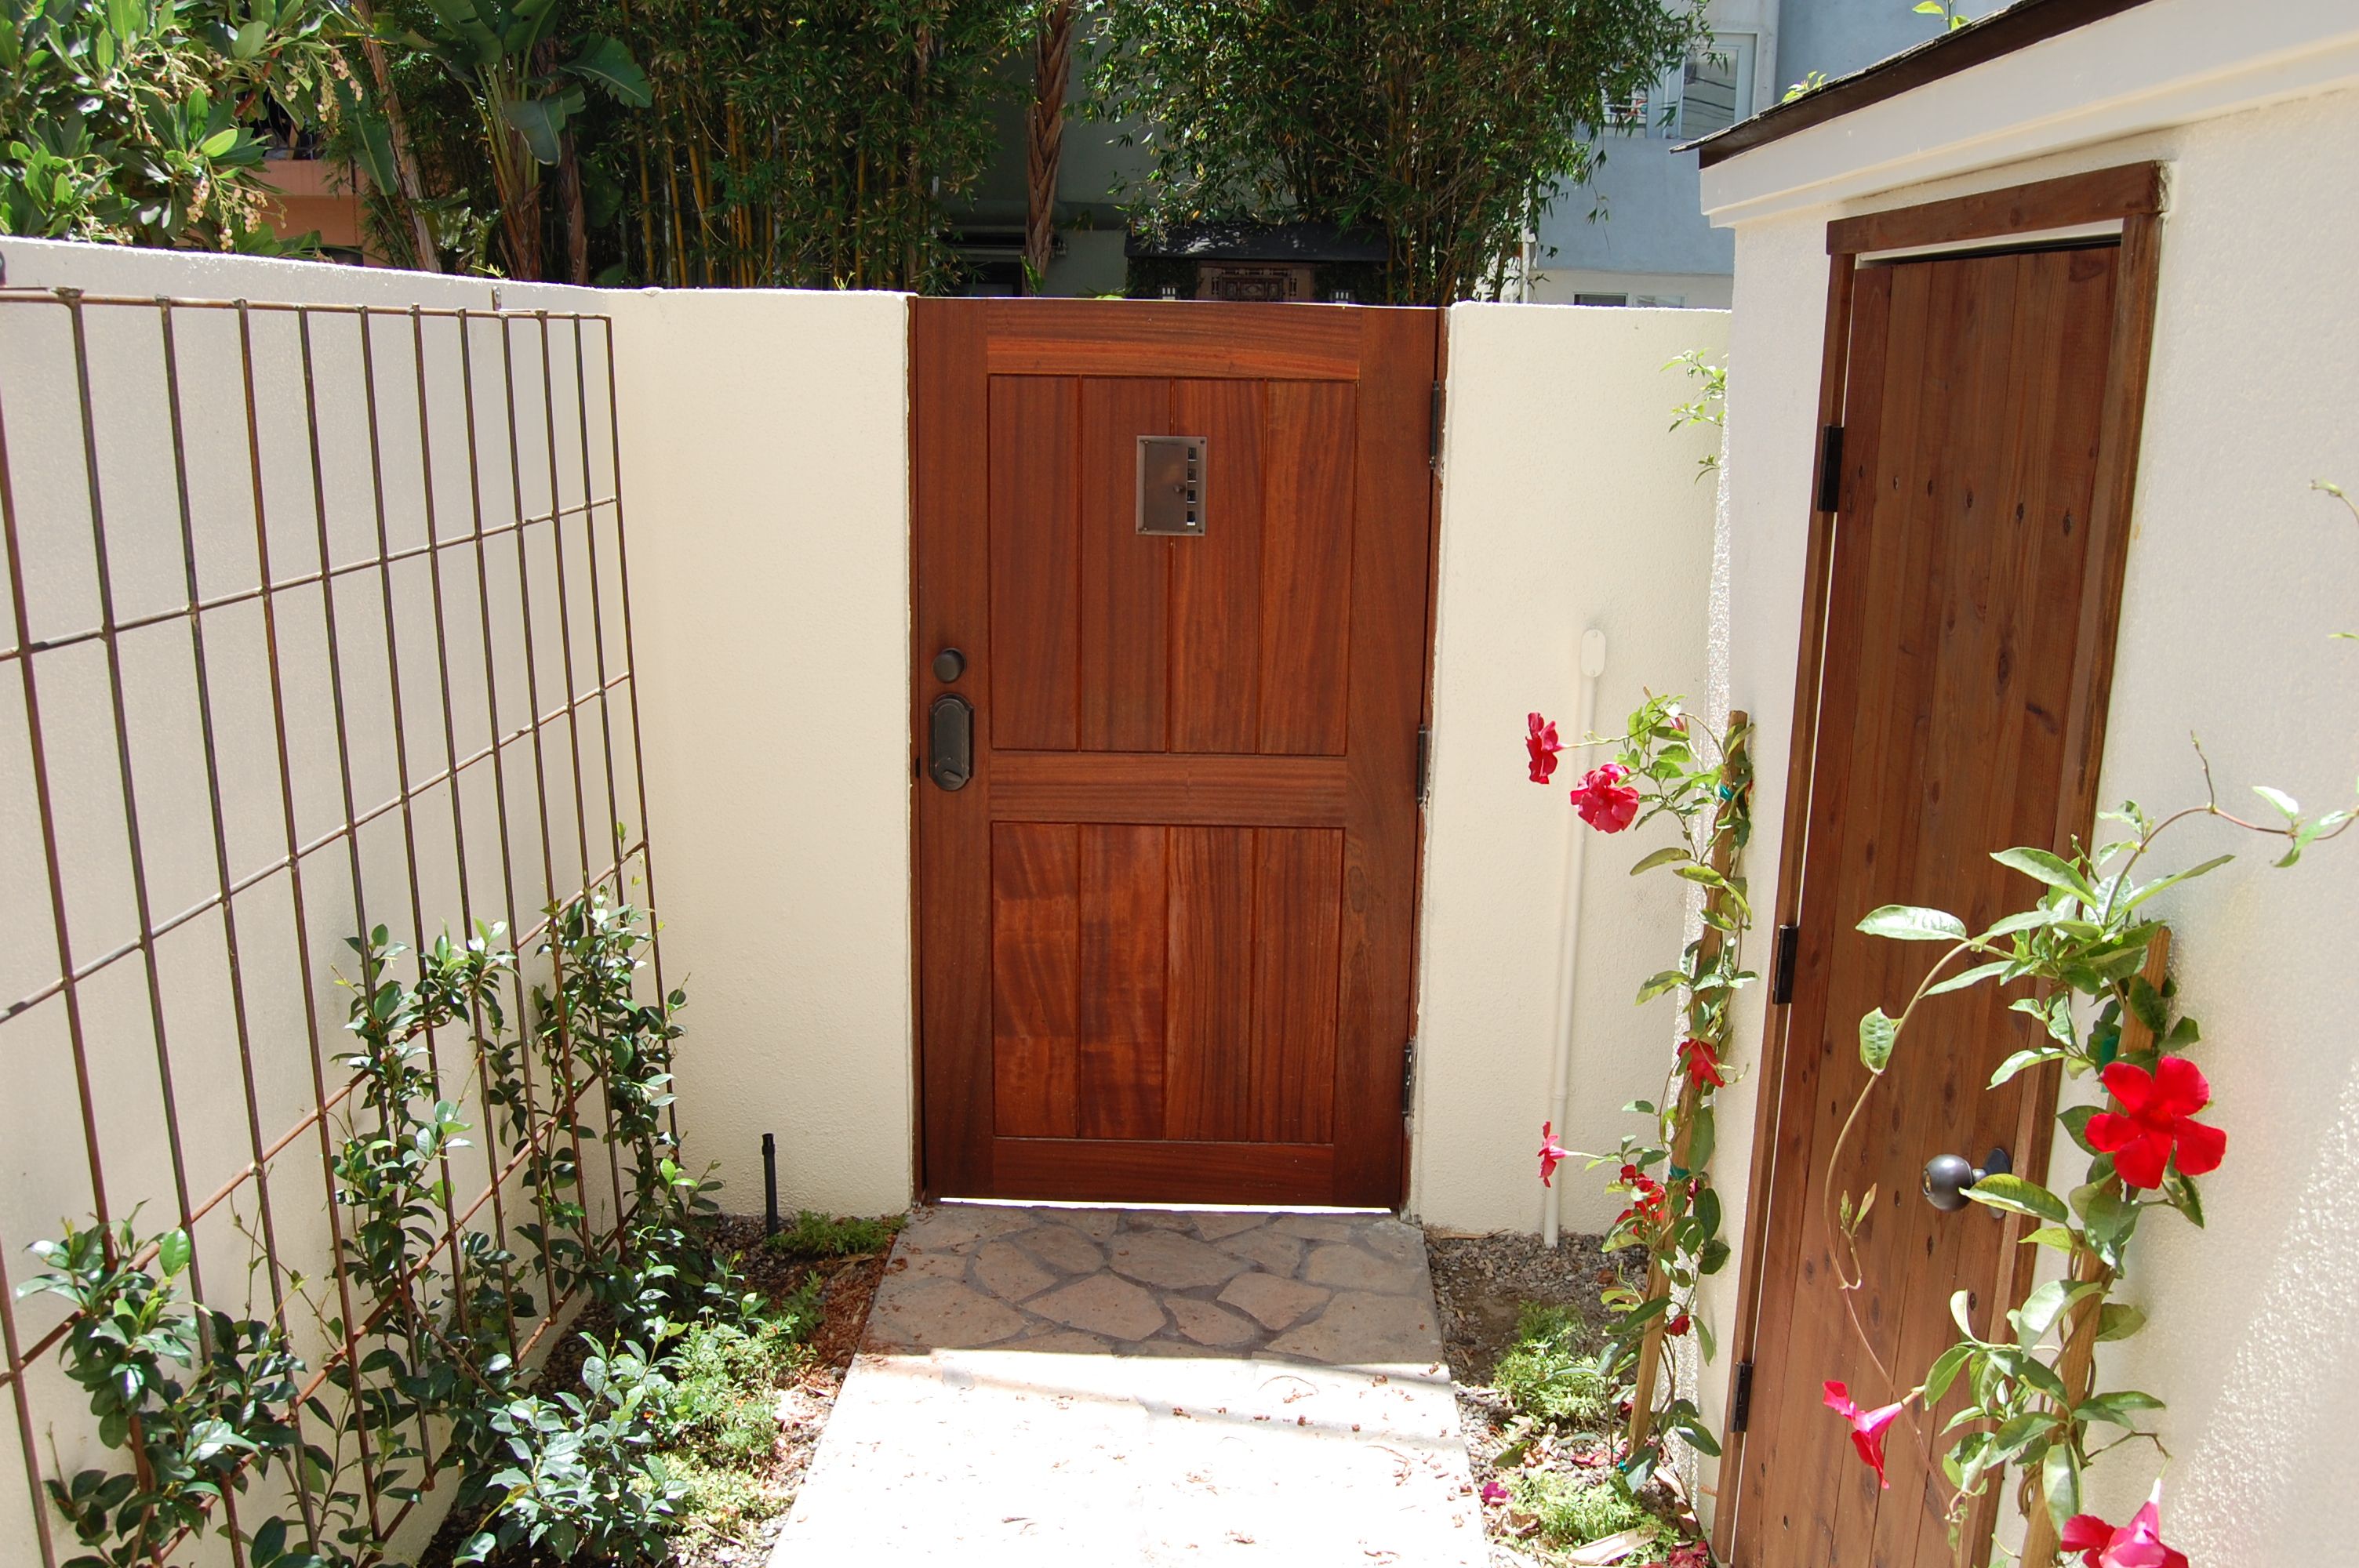 Hand Crafted Entry Gate by Altadena Designs